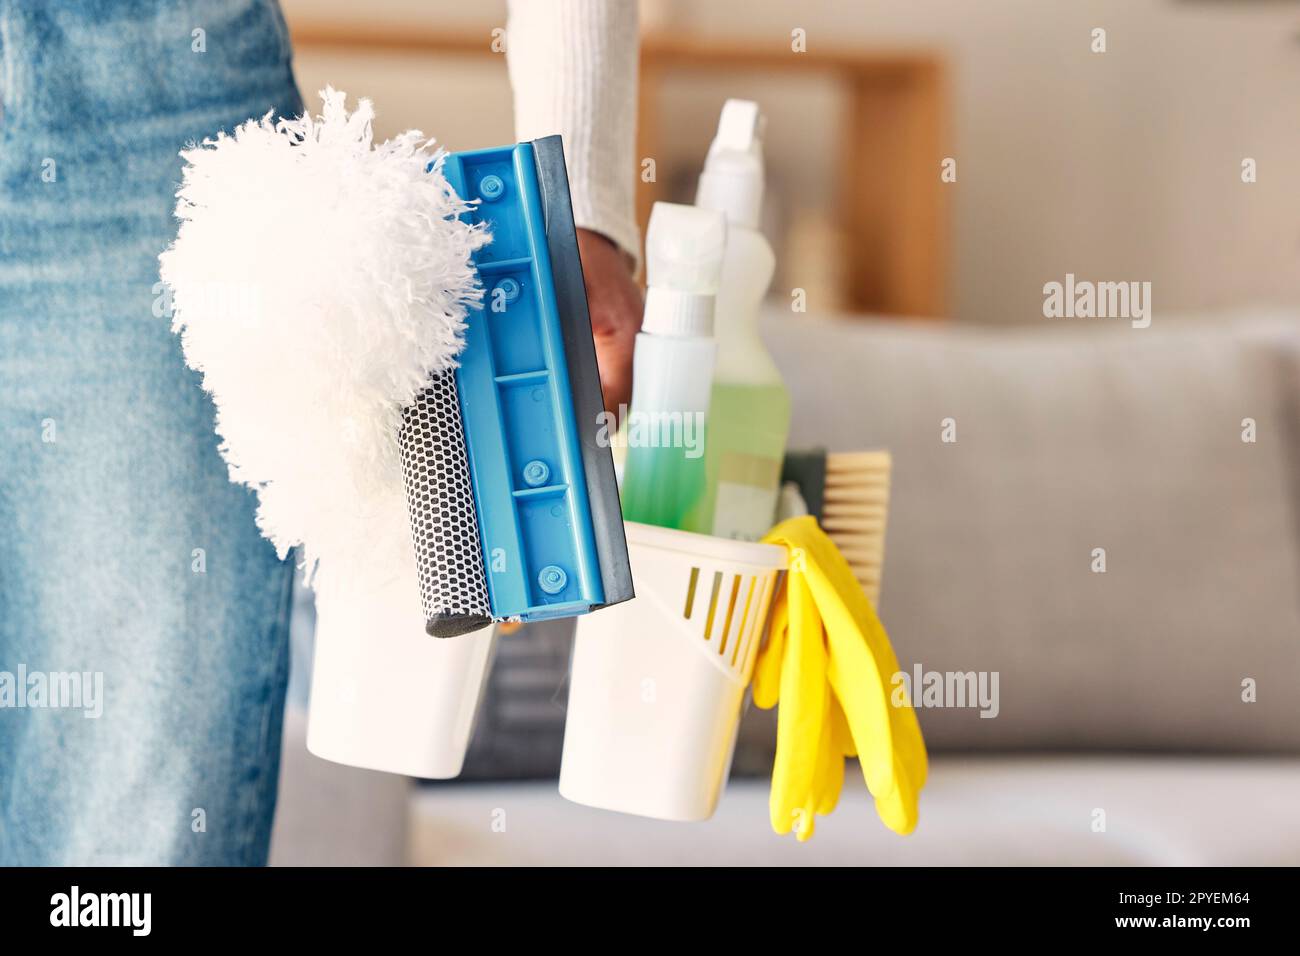 Cleaning, products and hand of cleaner with basket in home preparing for cleaning service. Spring cleaning, hygiene and black woman with cleaning supplies to remove germs, bacteria or dust in house. Stock Photo